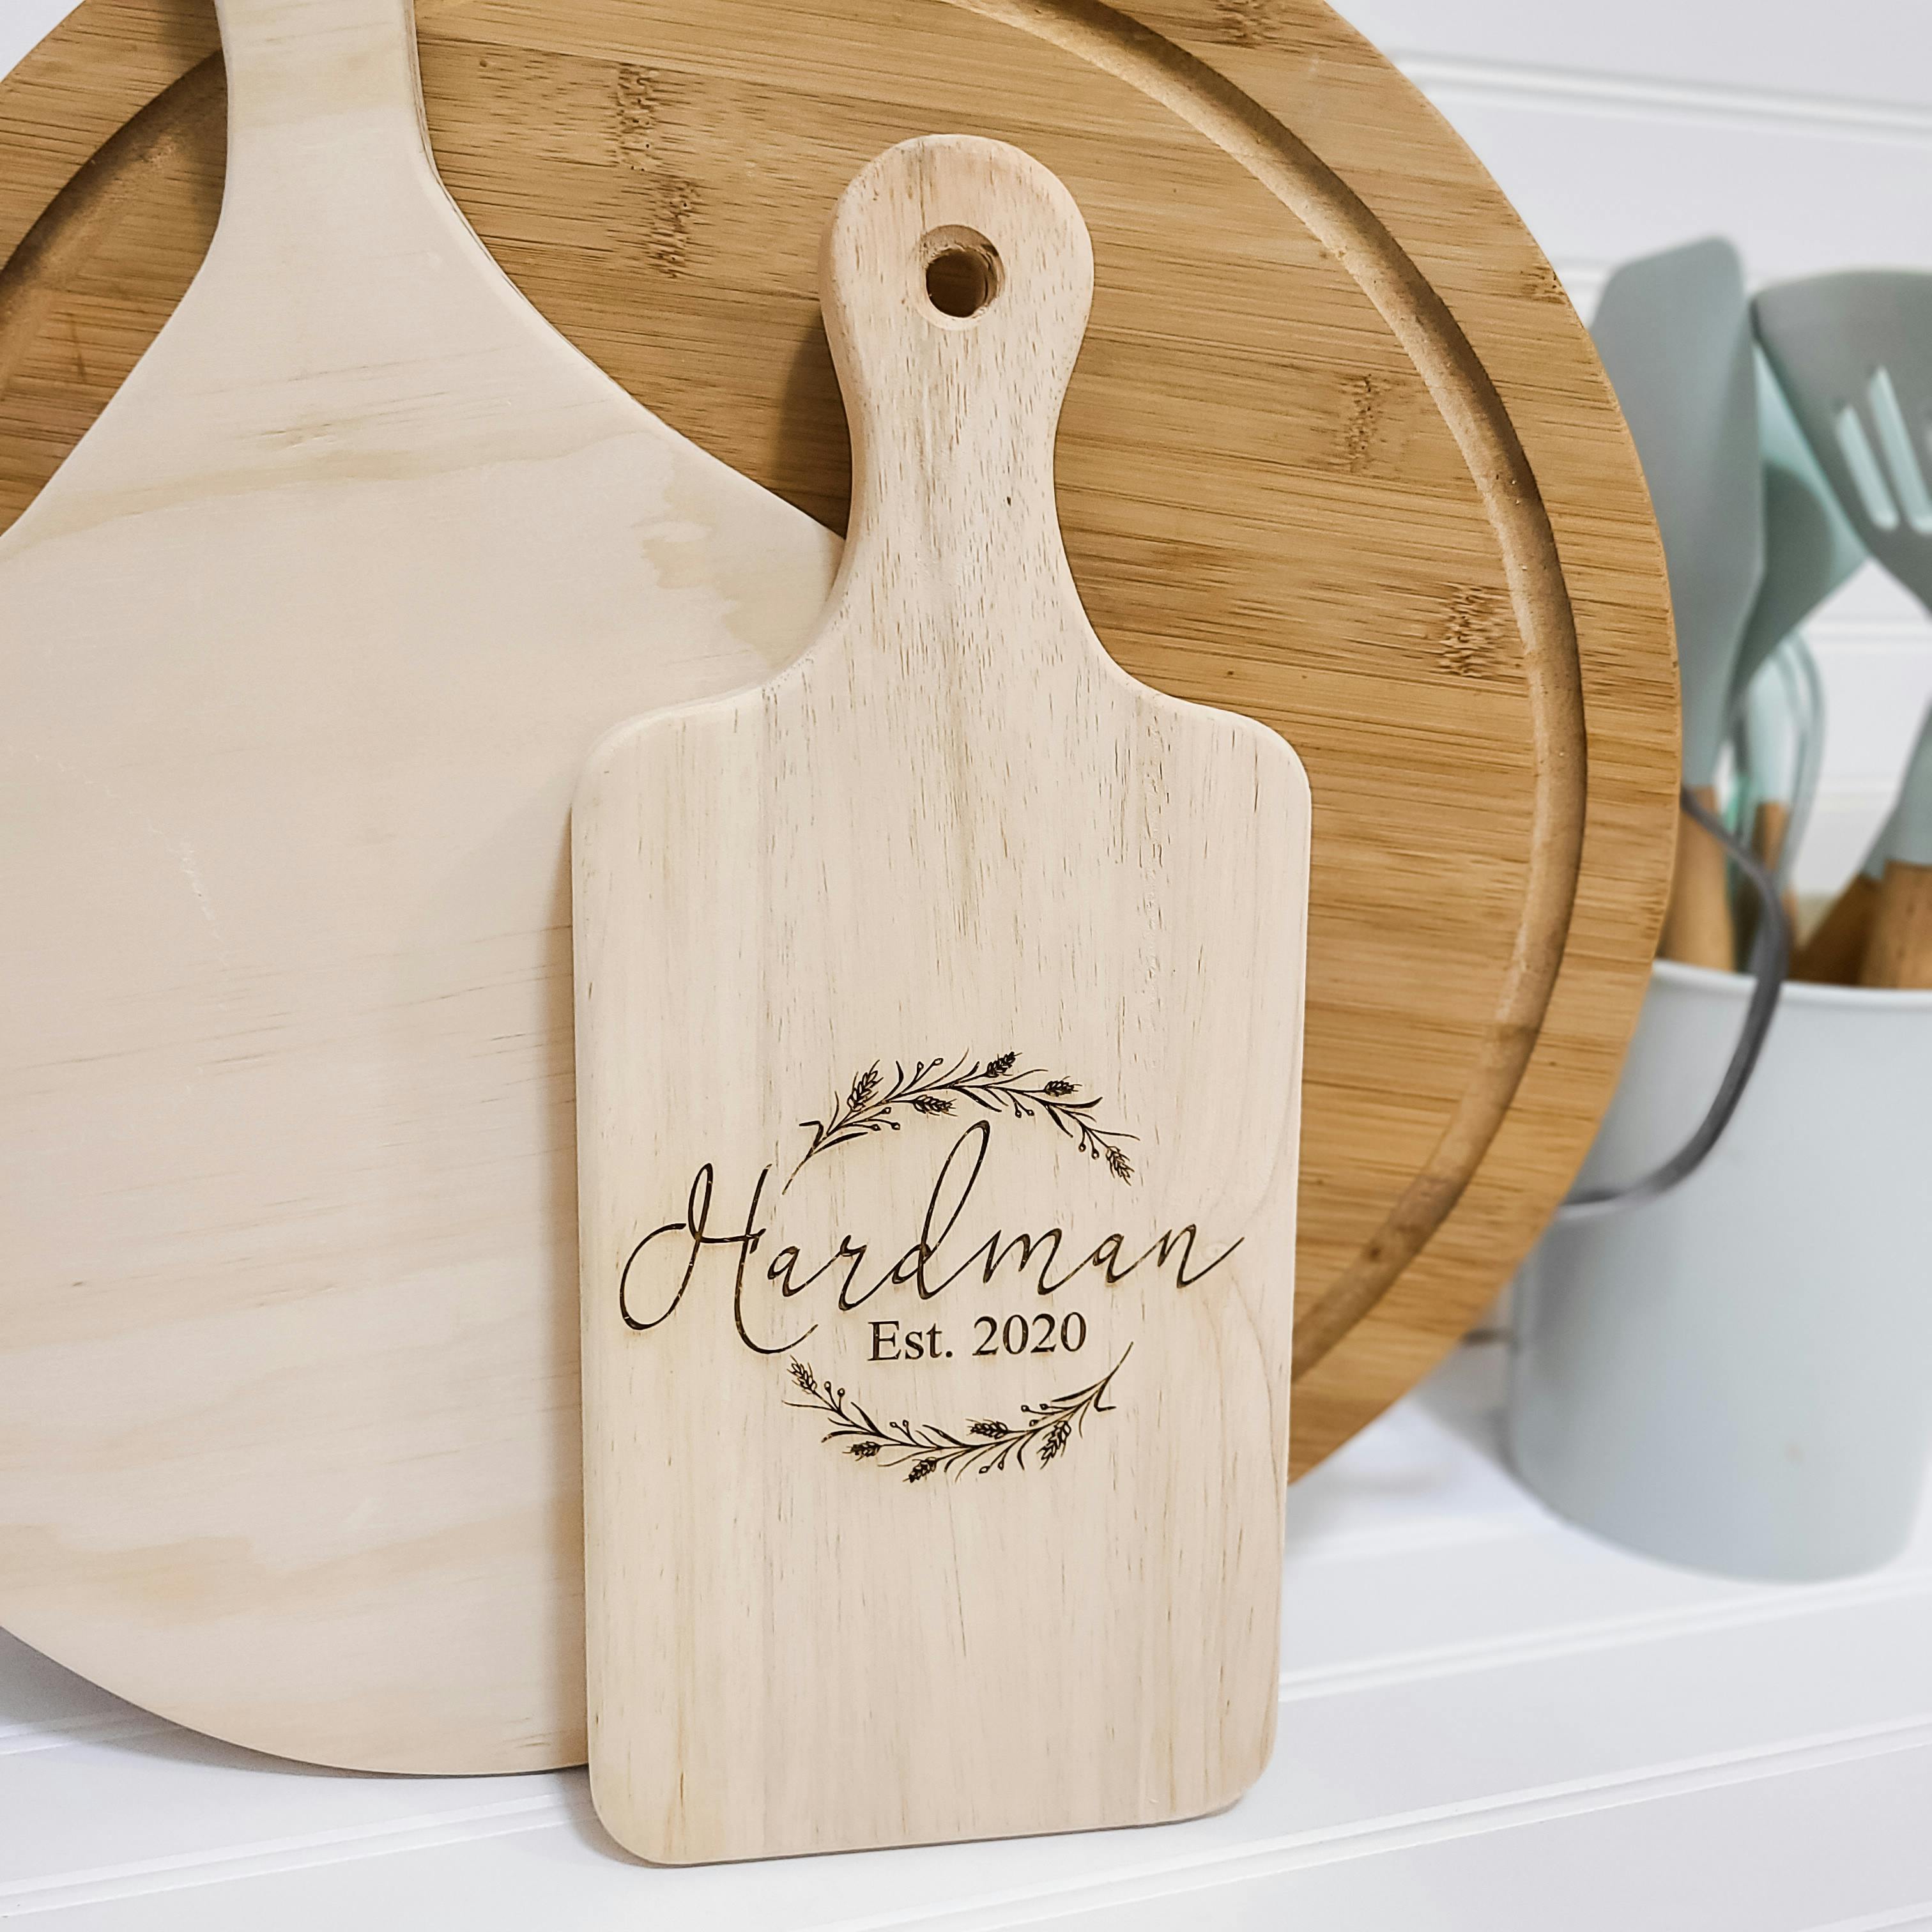 Personalized engraved charcuterie board